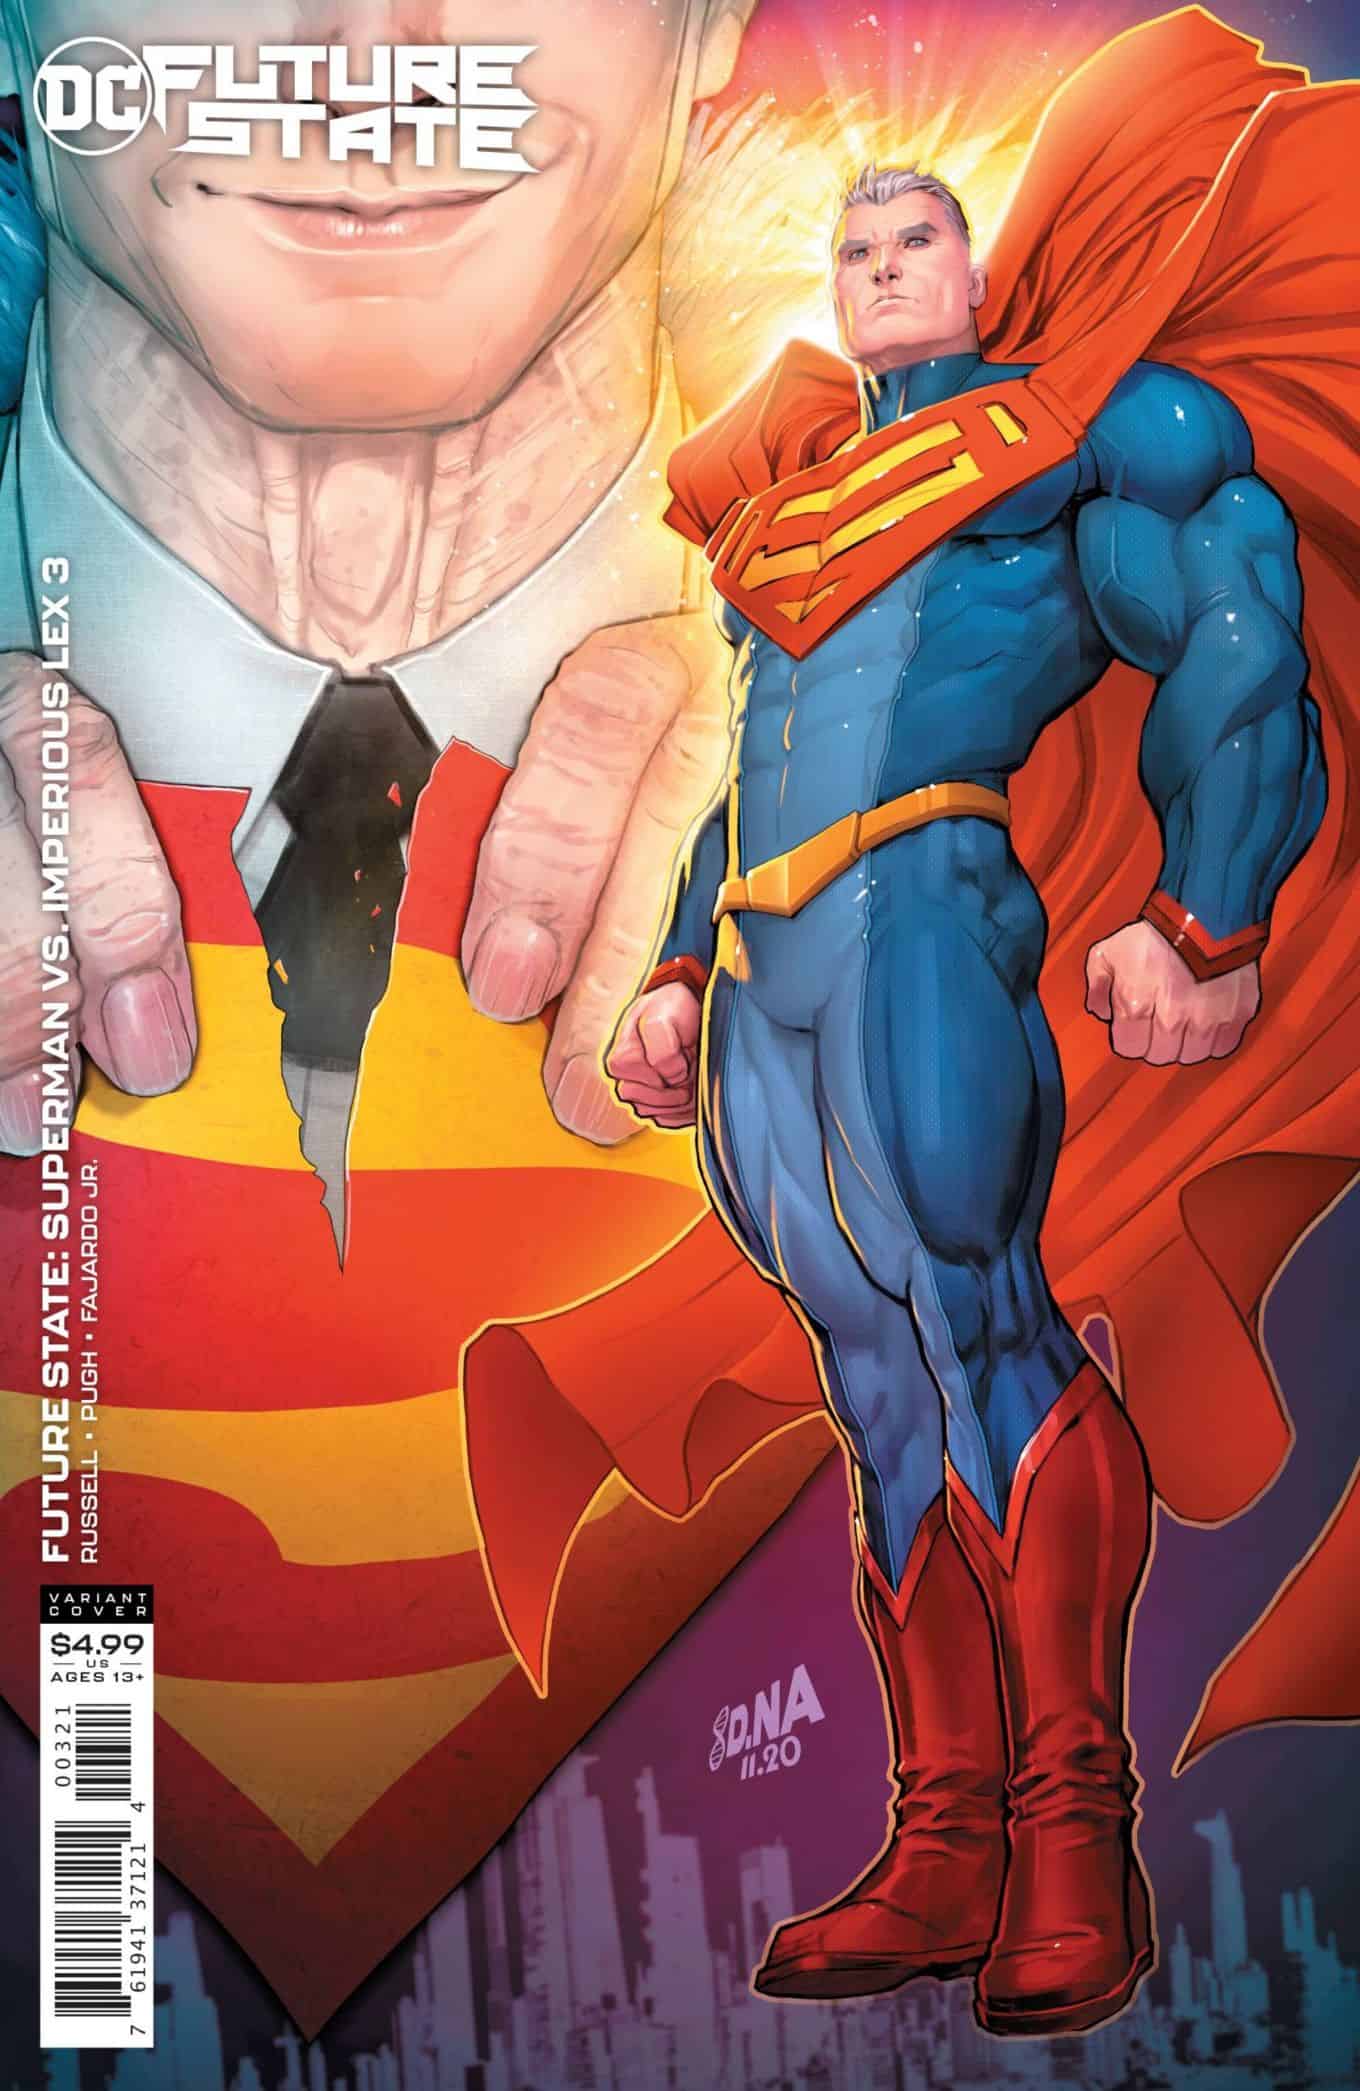 DC Comics & DC Future State: Superman Vs. Imperious Lex #3 Spoilers: How Does Future State Event End Before New Future State Series Begins?